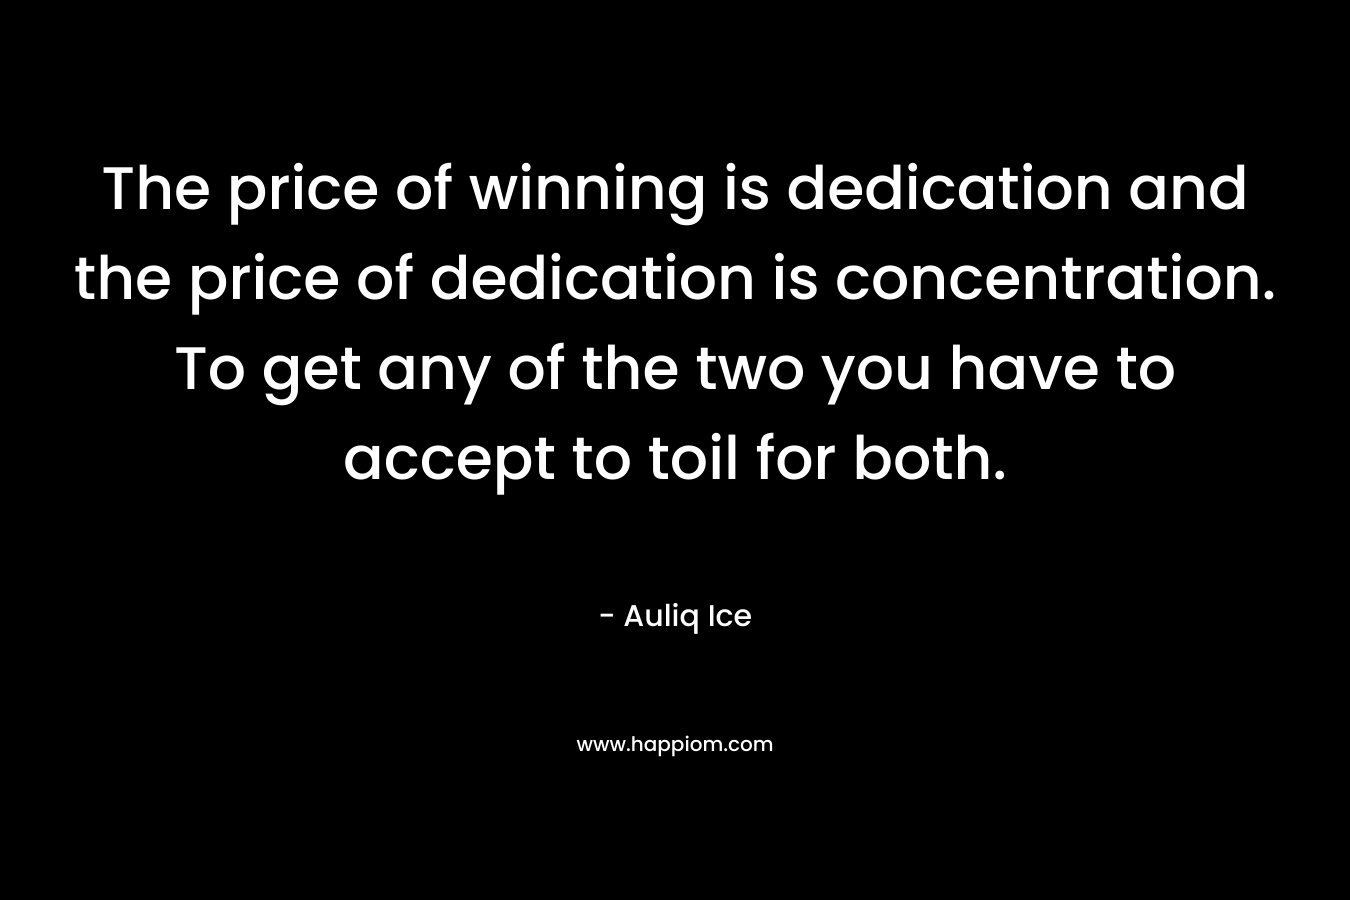 The price of winning is dedication and the price of dedication is concentration. To get any of the two you have to accept to toil for both.